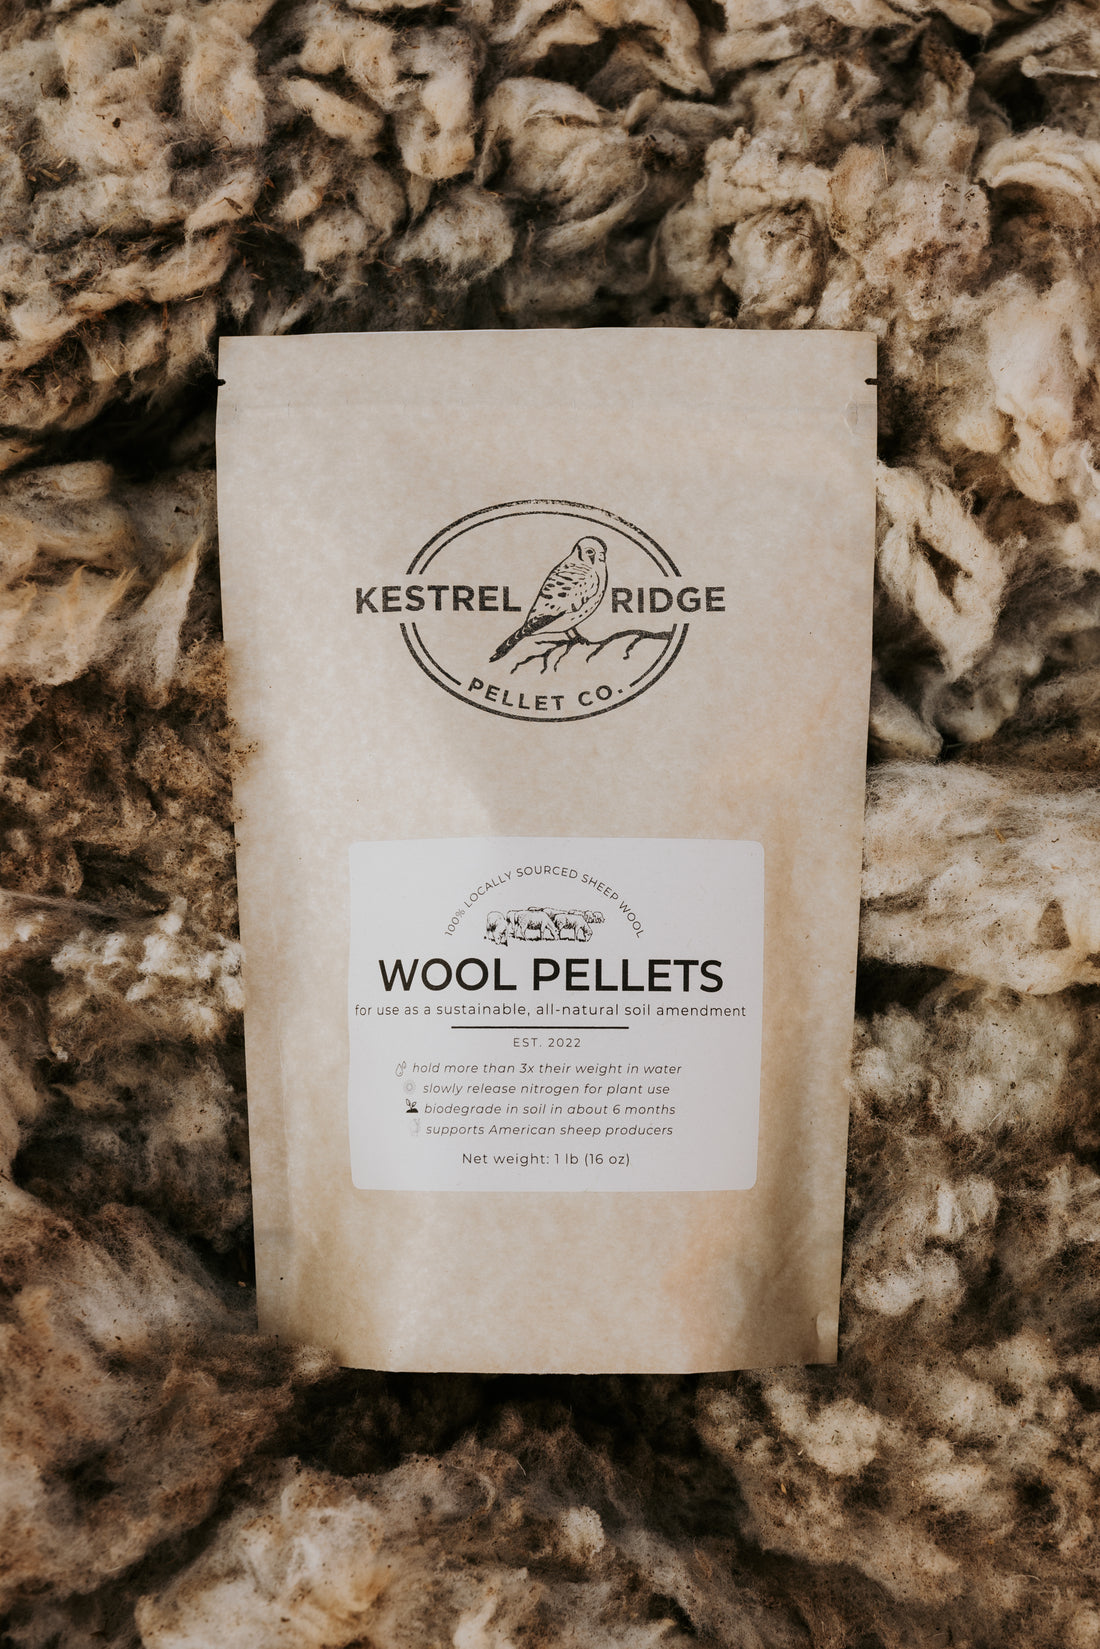 Where can you use wool pellets?